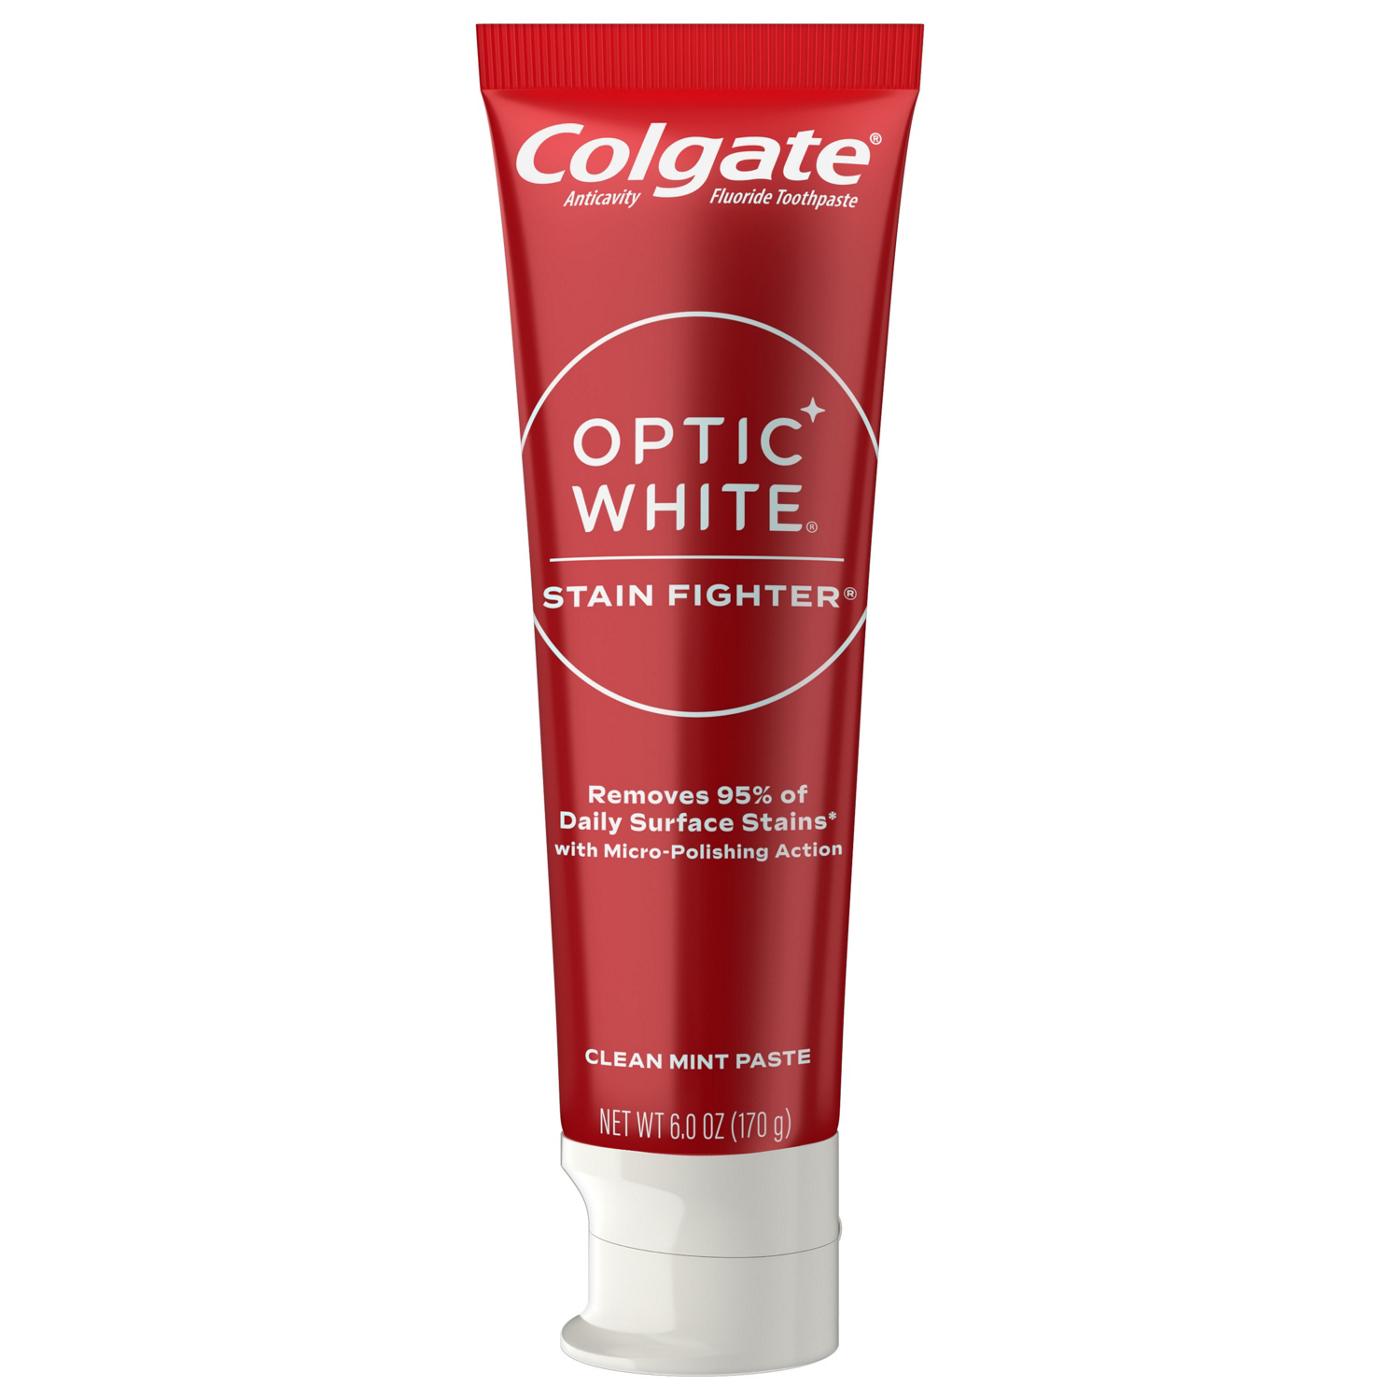 Colgate Optic White Anticavity Toothpaste - Clean Mint; image 6 of 10